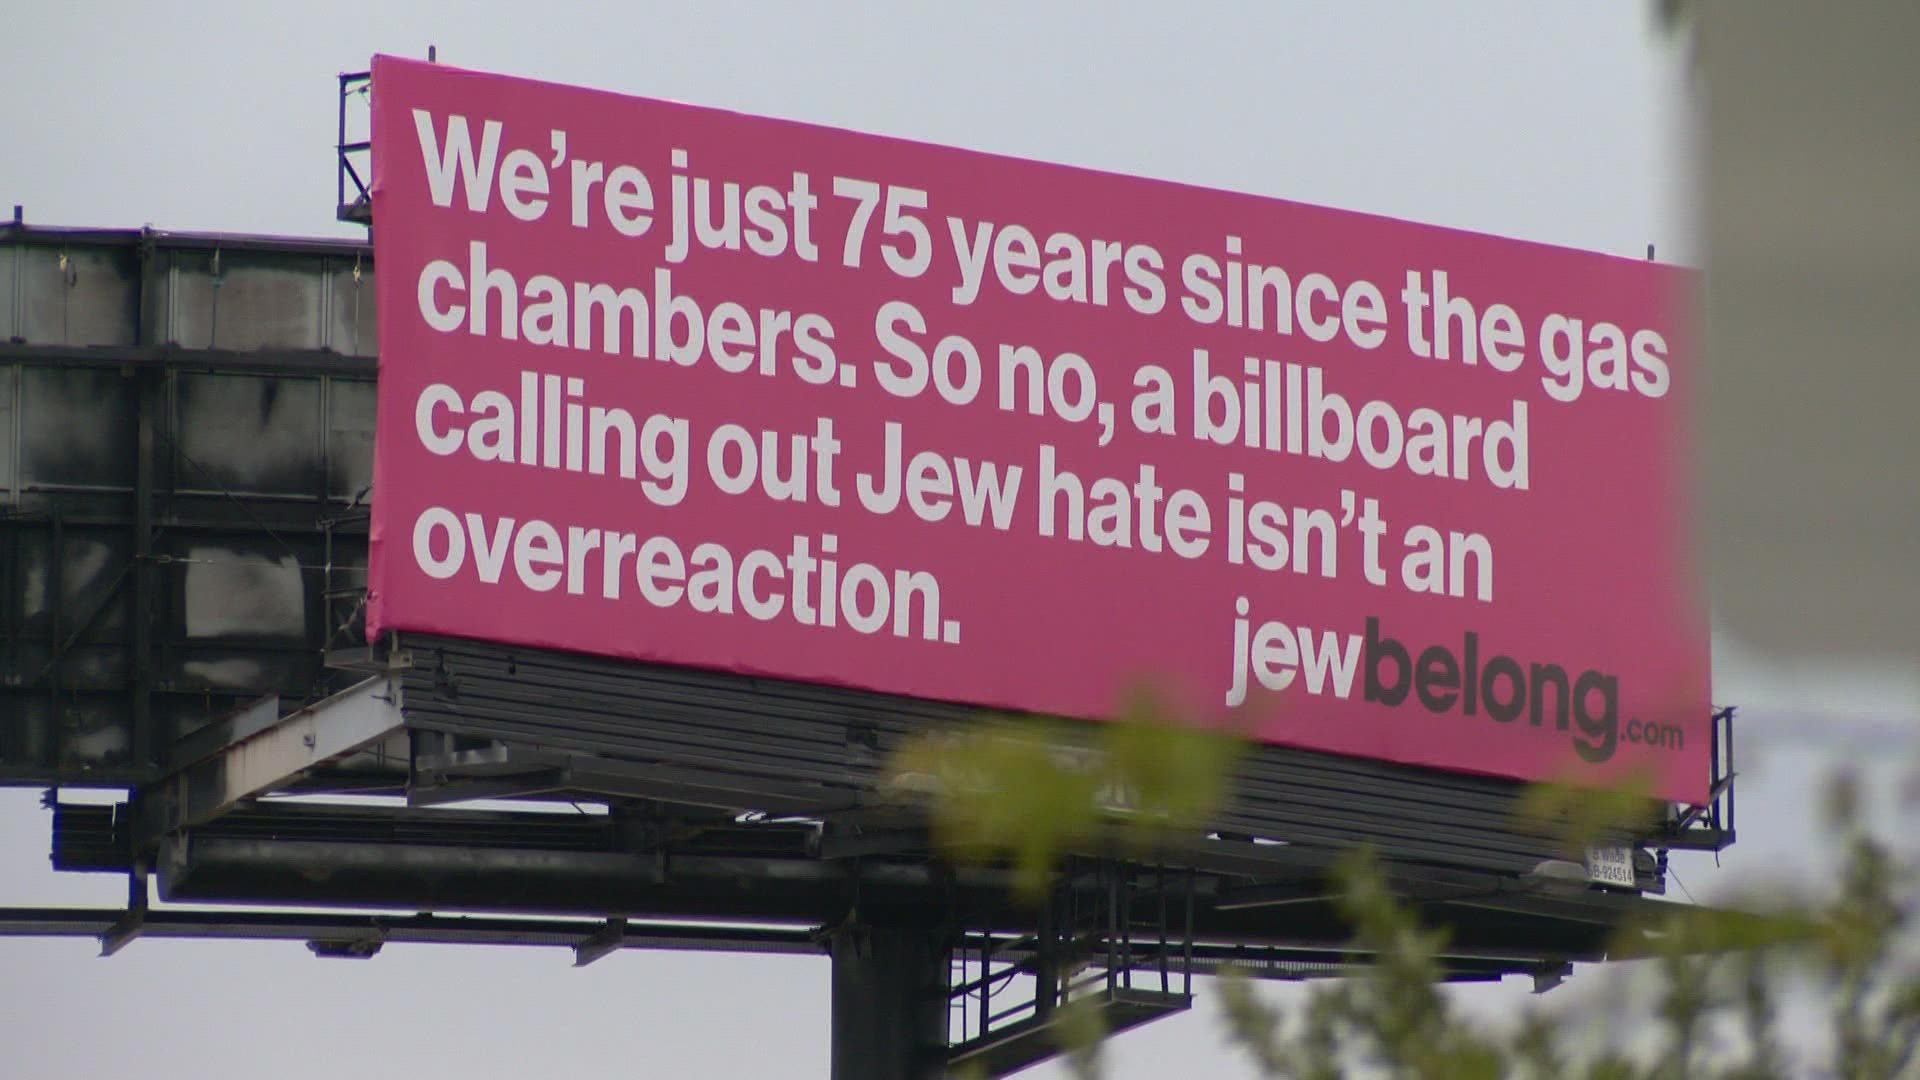 San Antonio is one of at least six cities nationwide where these billboards were put up, with the goal of sparking productive conversations.